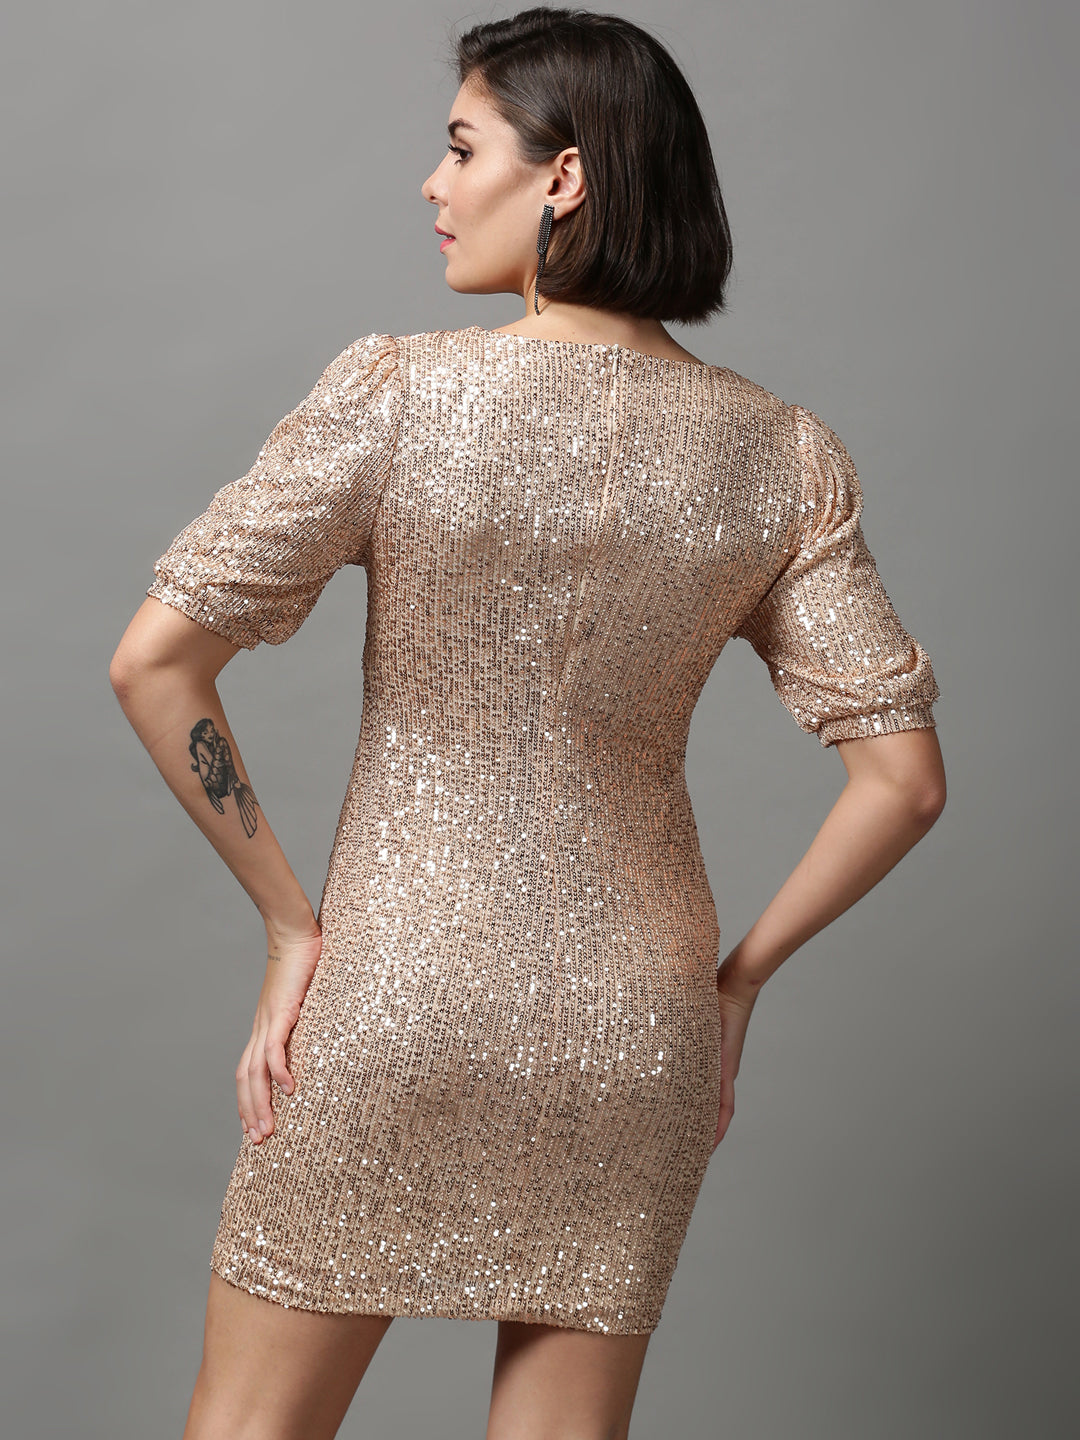 Women's Rose Gold Solid Bodycon Dress